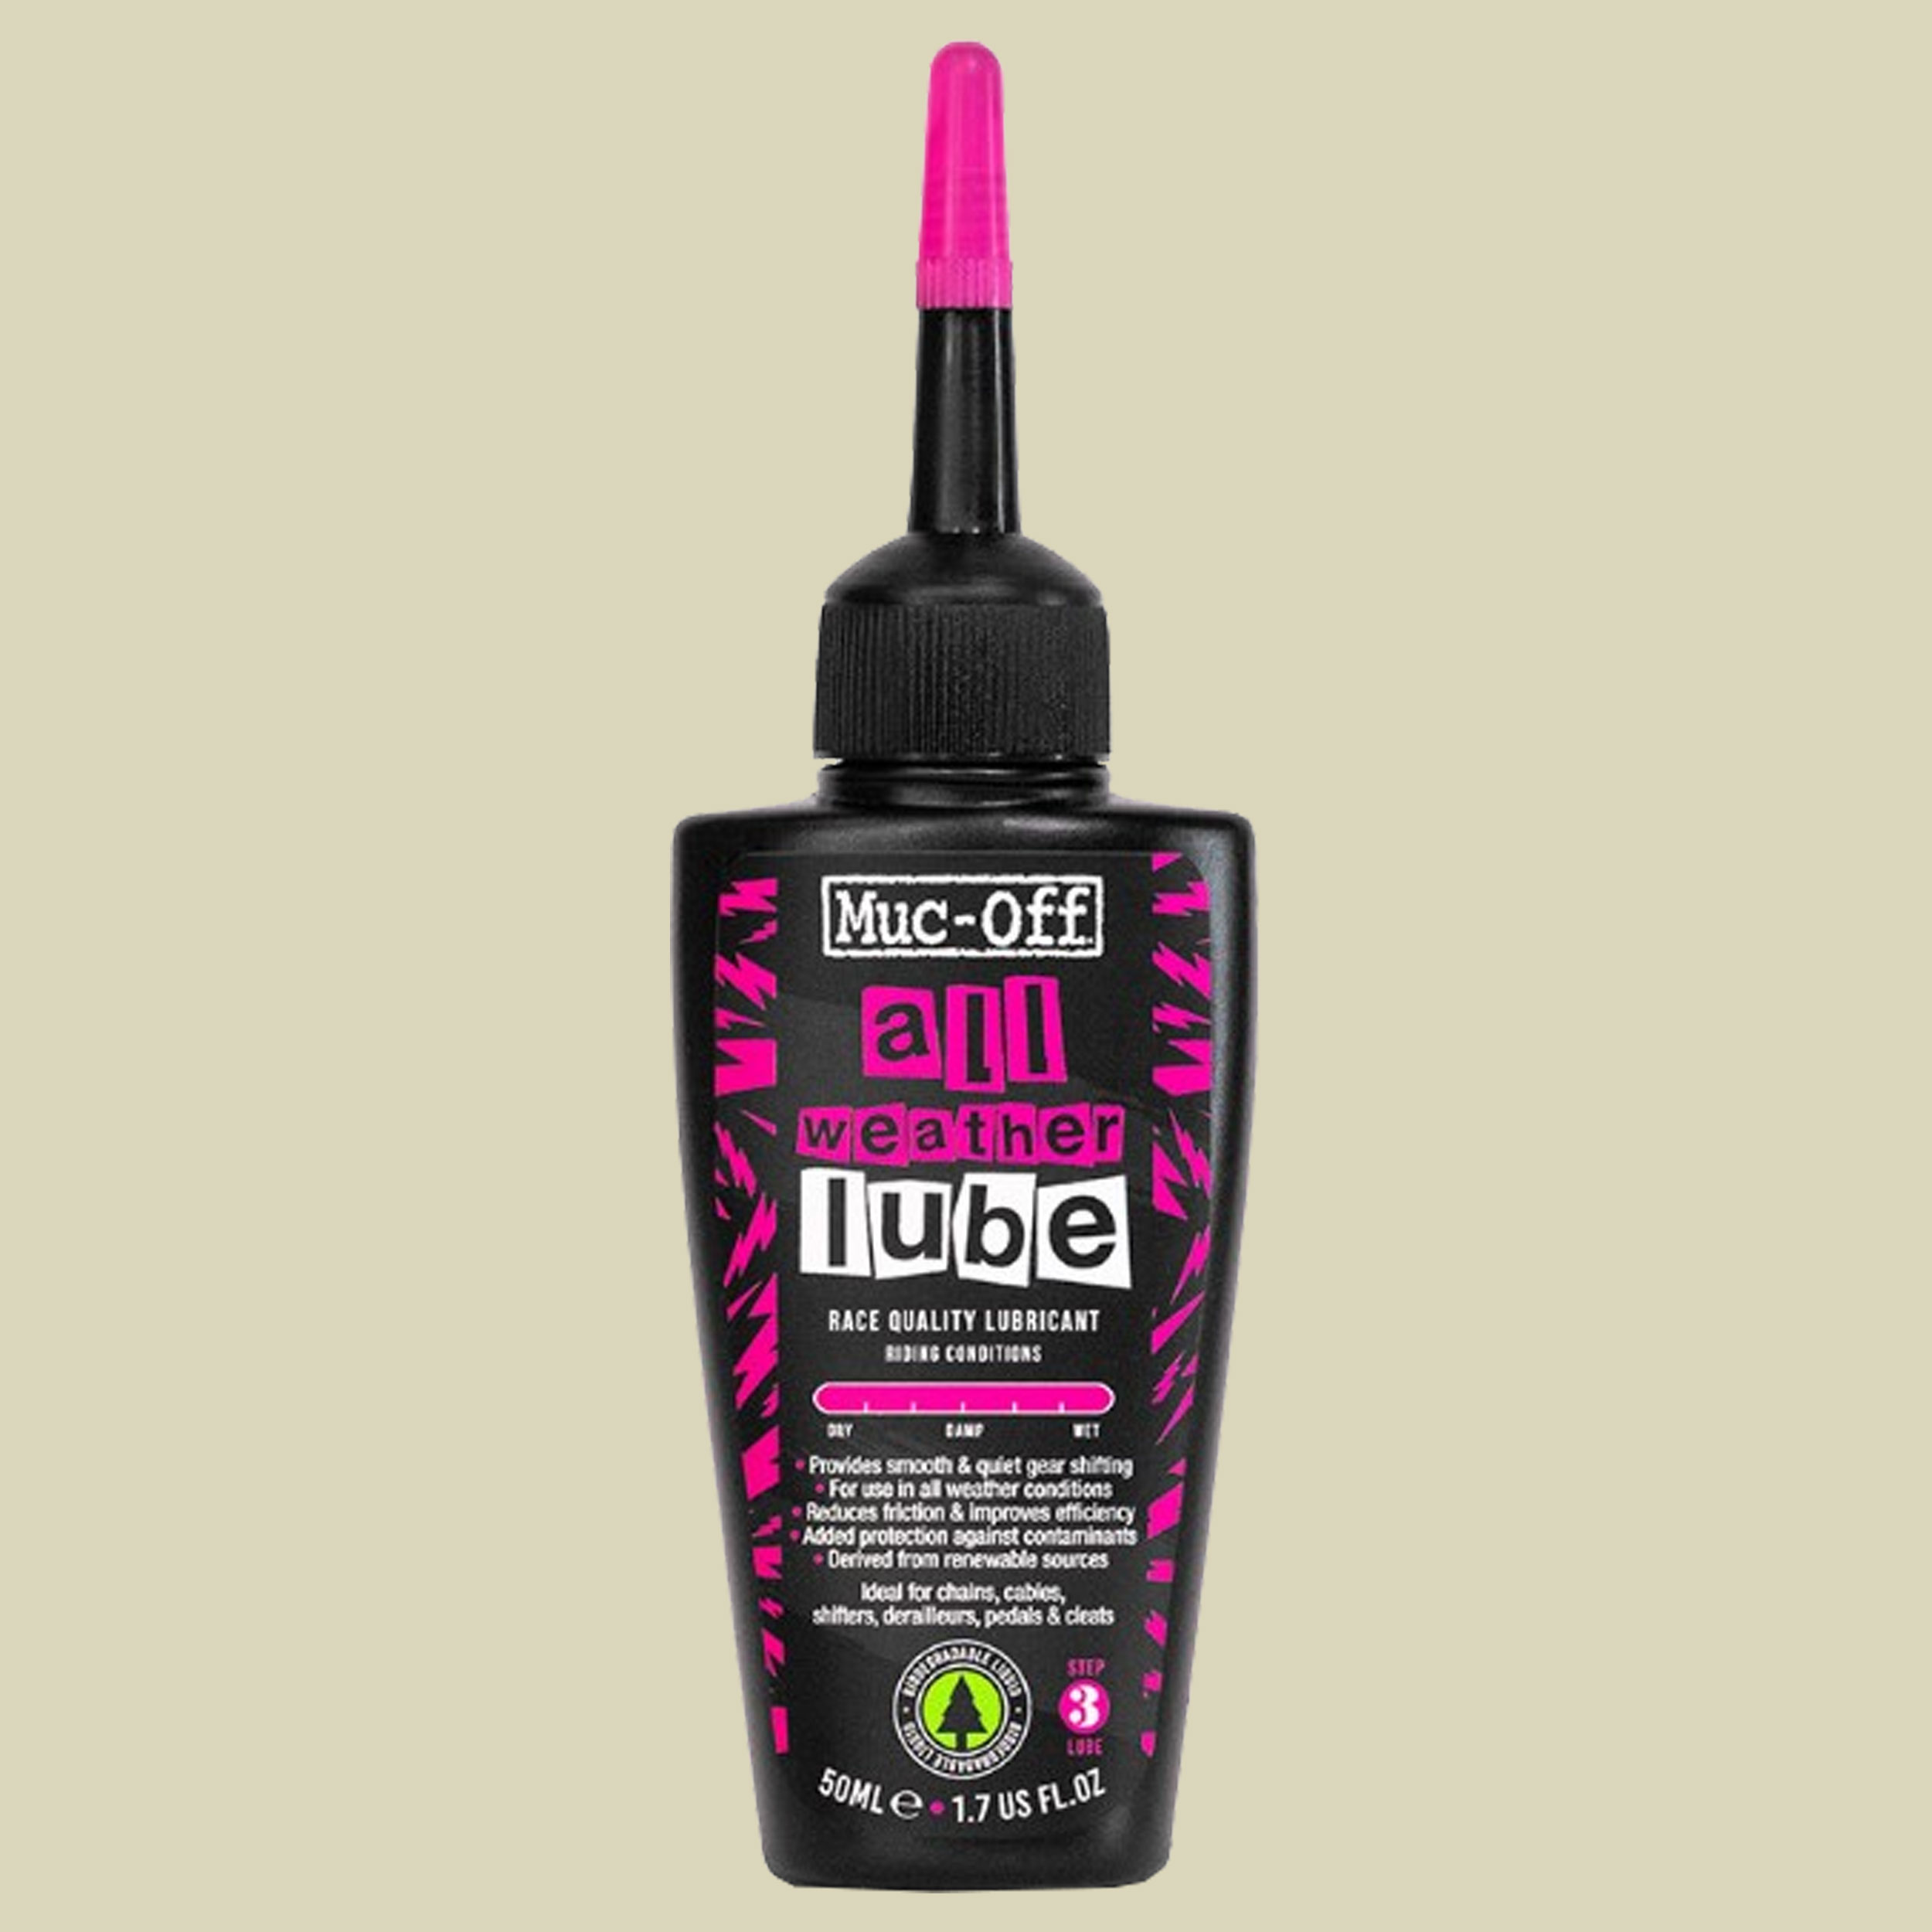 All Weather Lube 50 ml